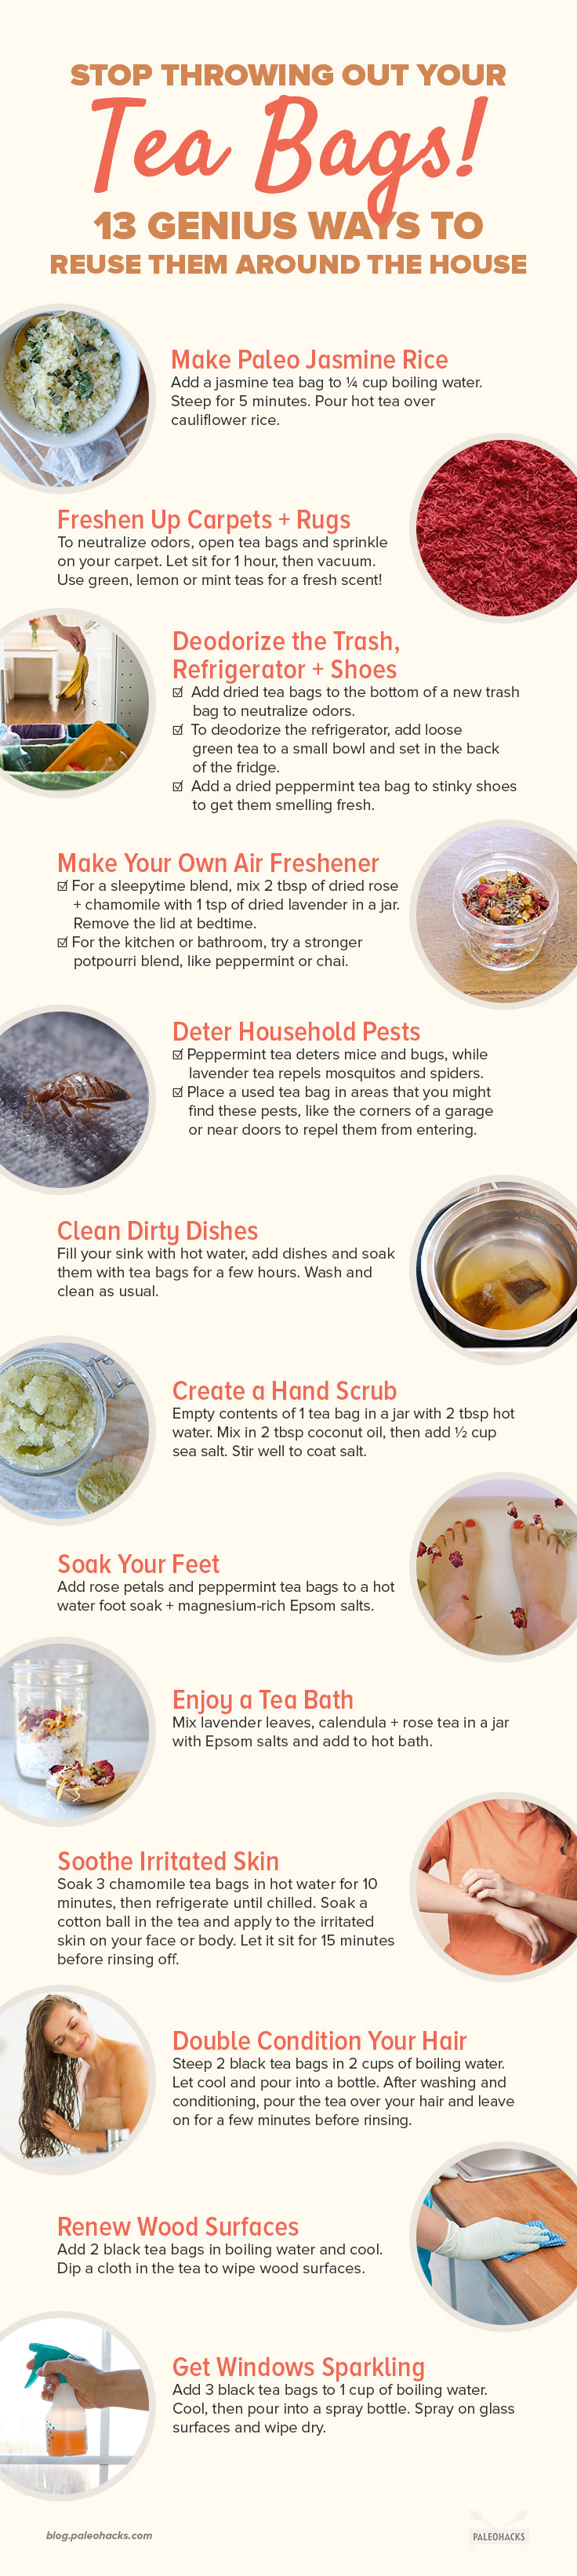 Check out these 13 surprising ways you can use them to flavor food, deodorize shoes, degrease a pan or even make a spa-worthy hand scrub.